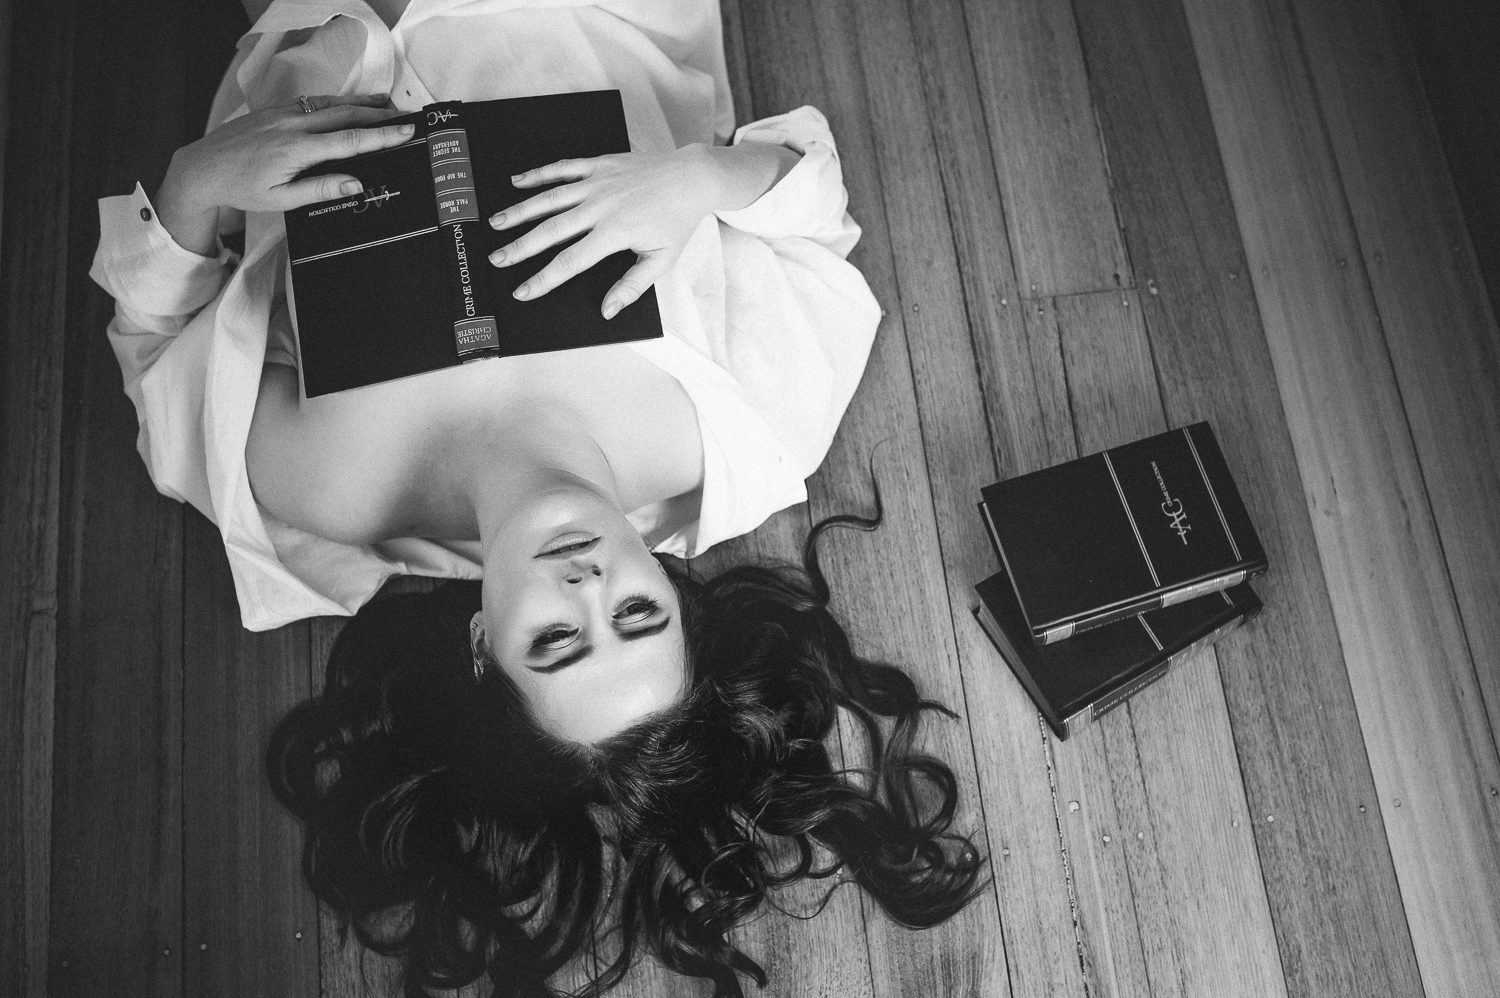 Implied topless photography using books.